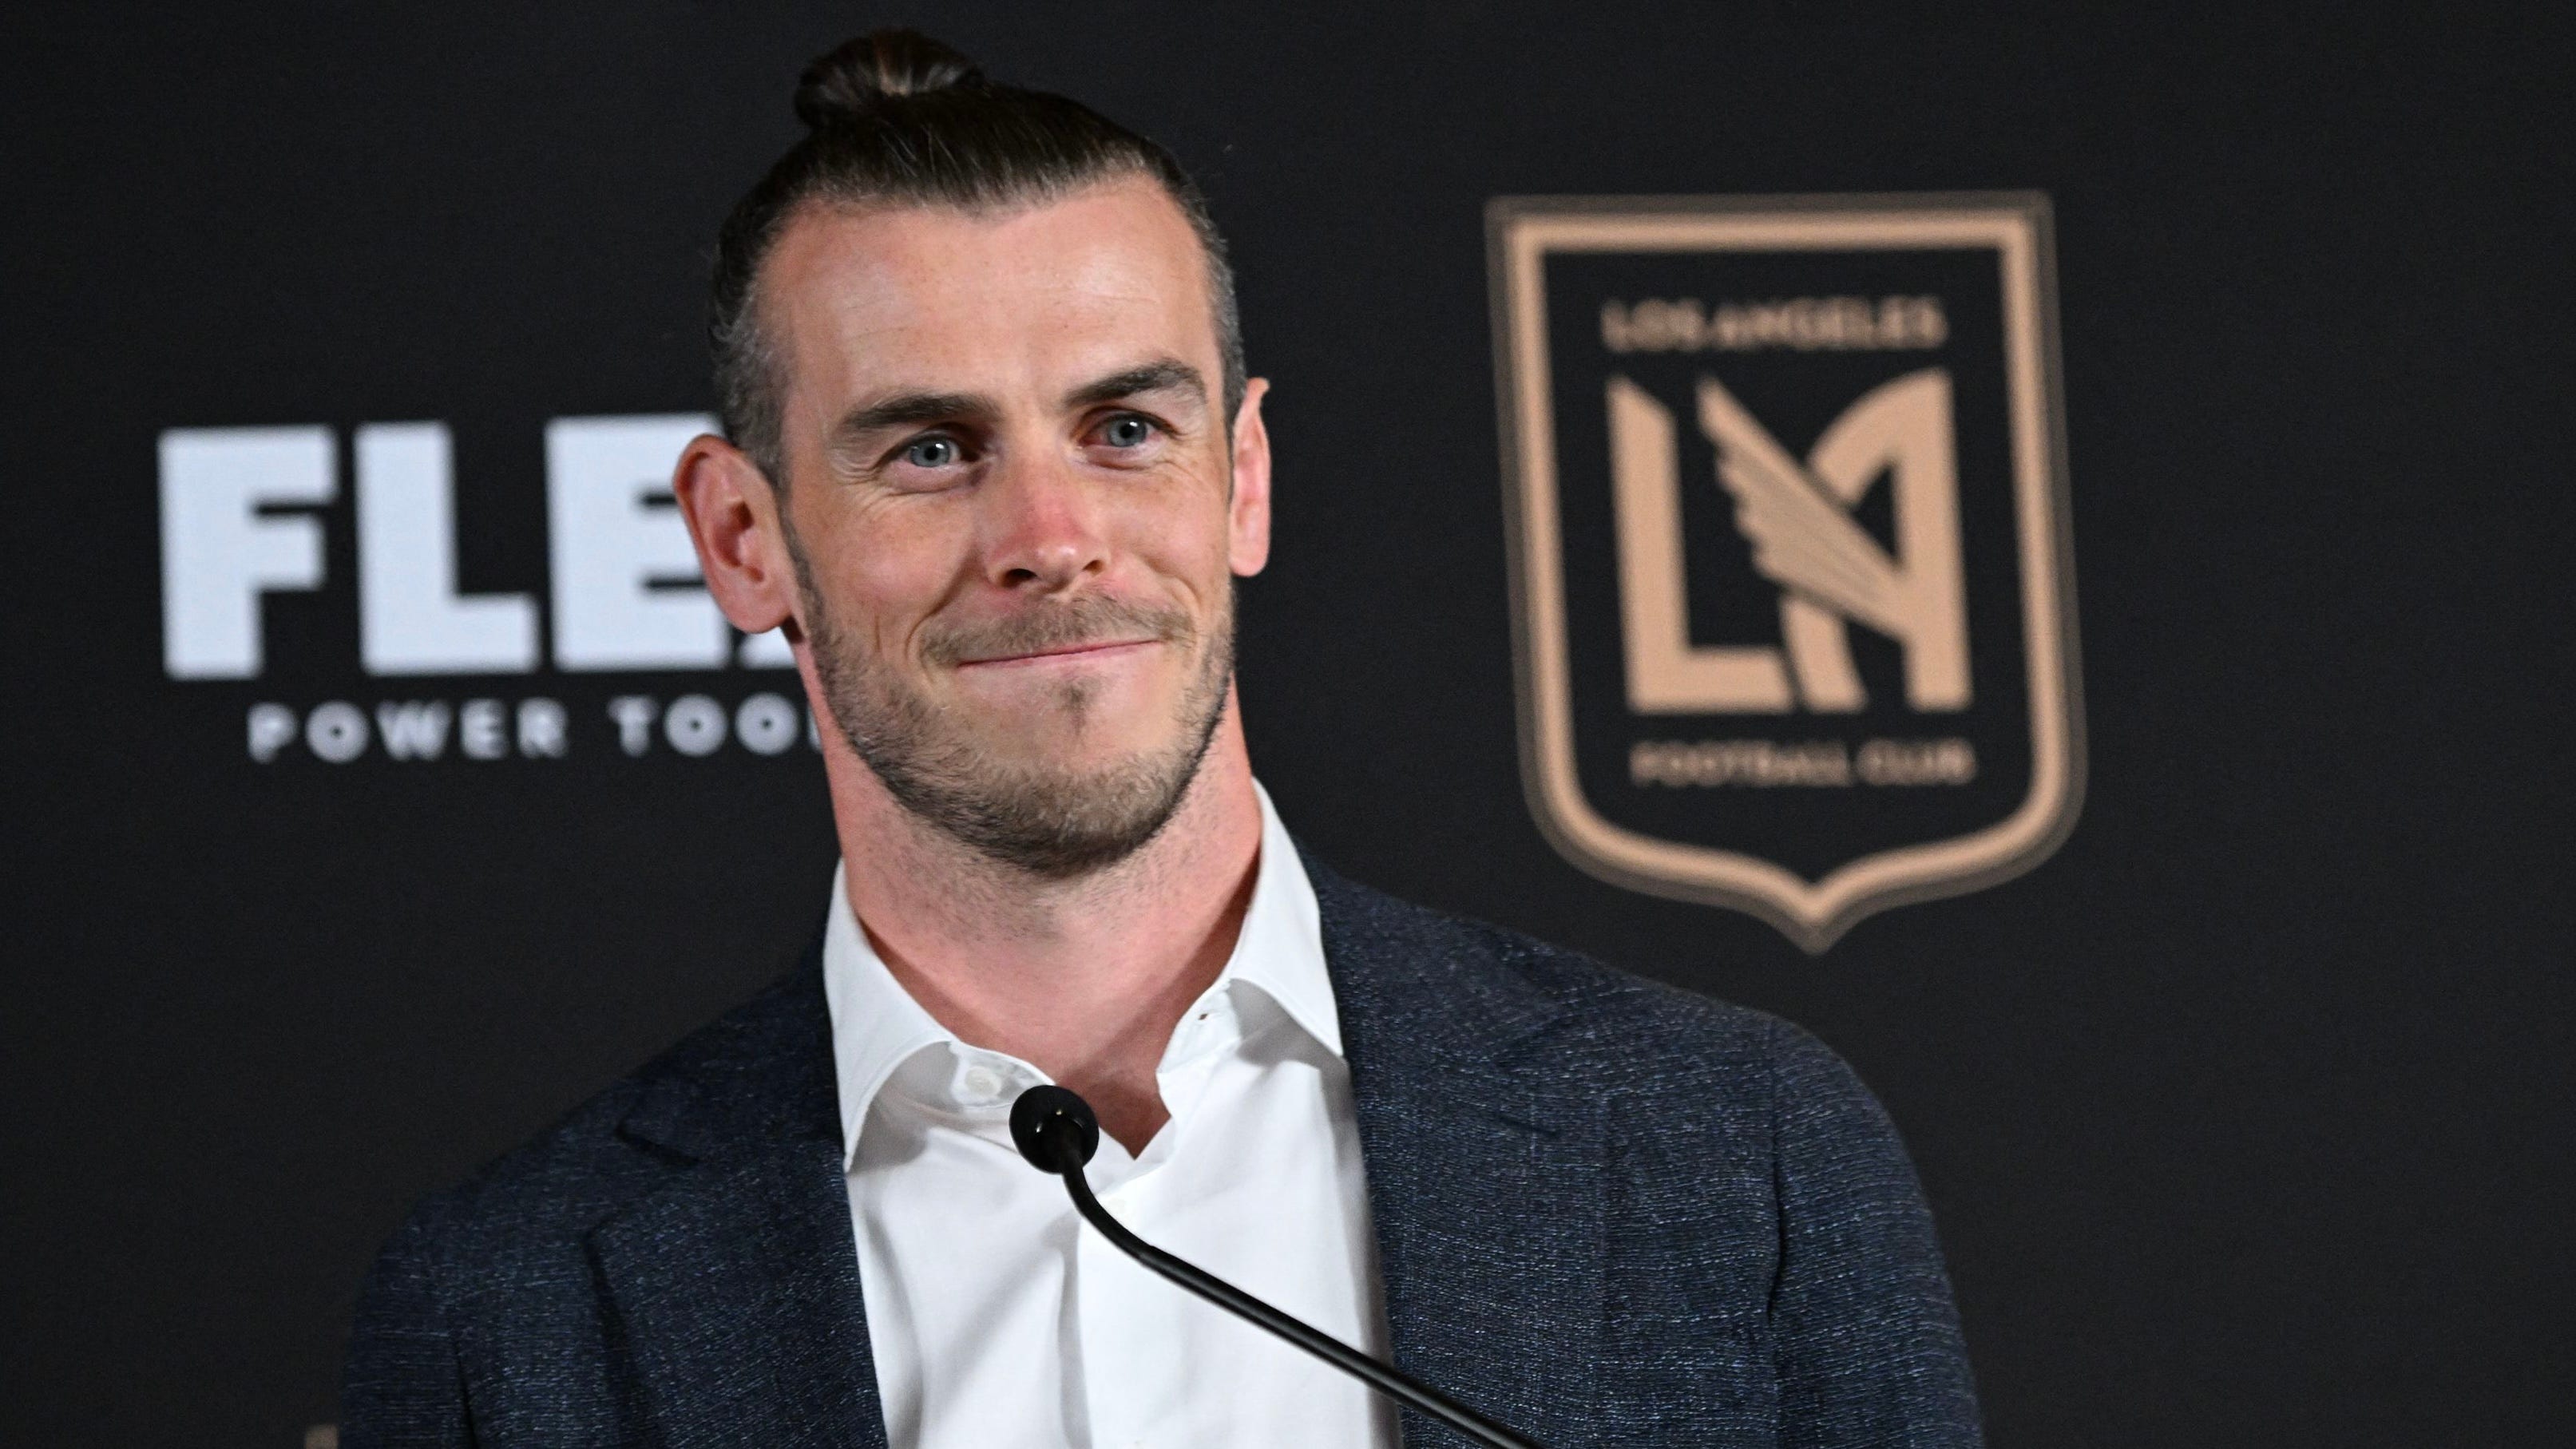 Gareth Bale's first LAFC start ends in DISASTER with his side thrashed 4-1  by Austin